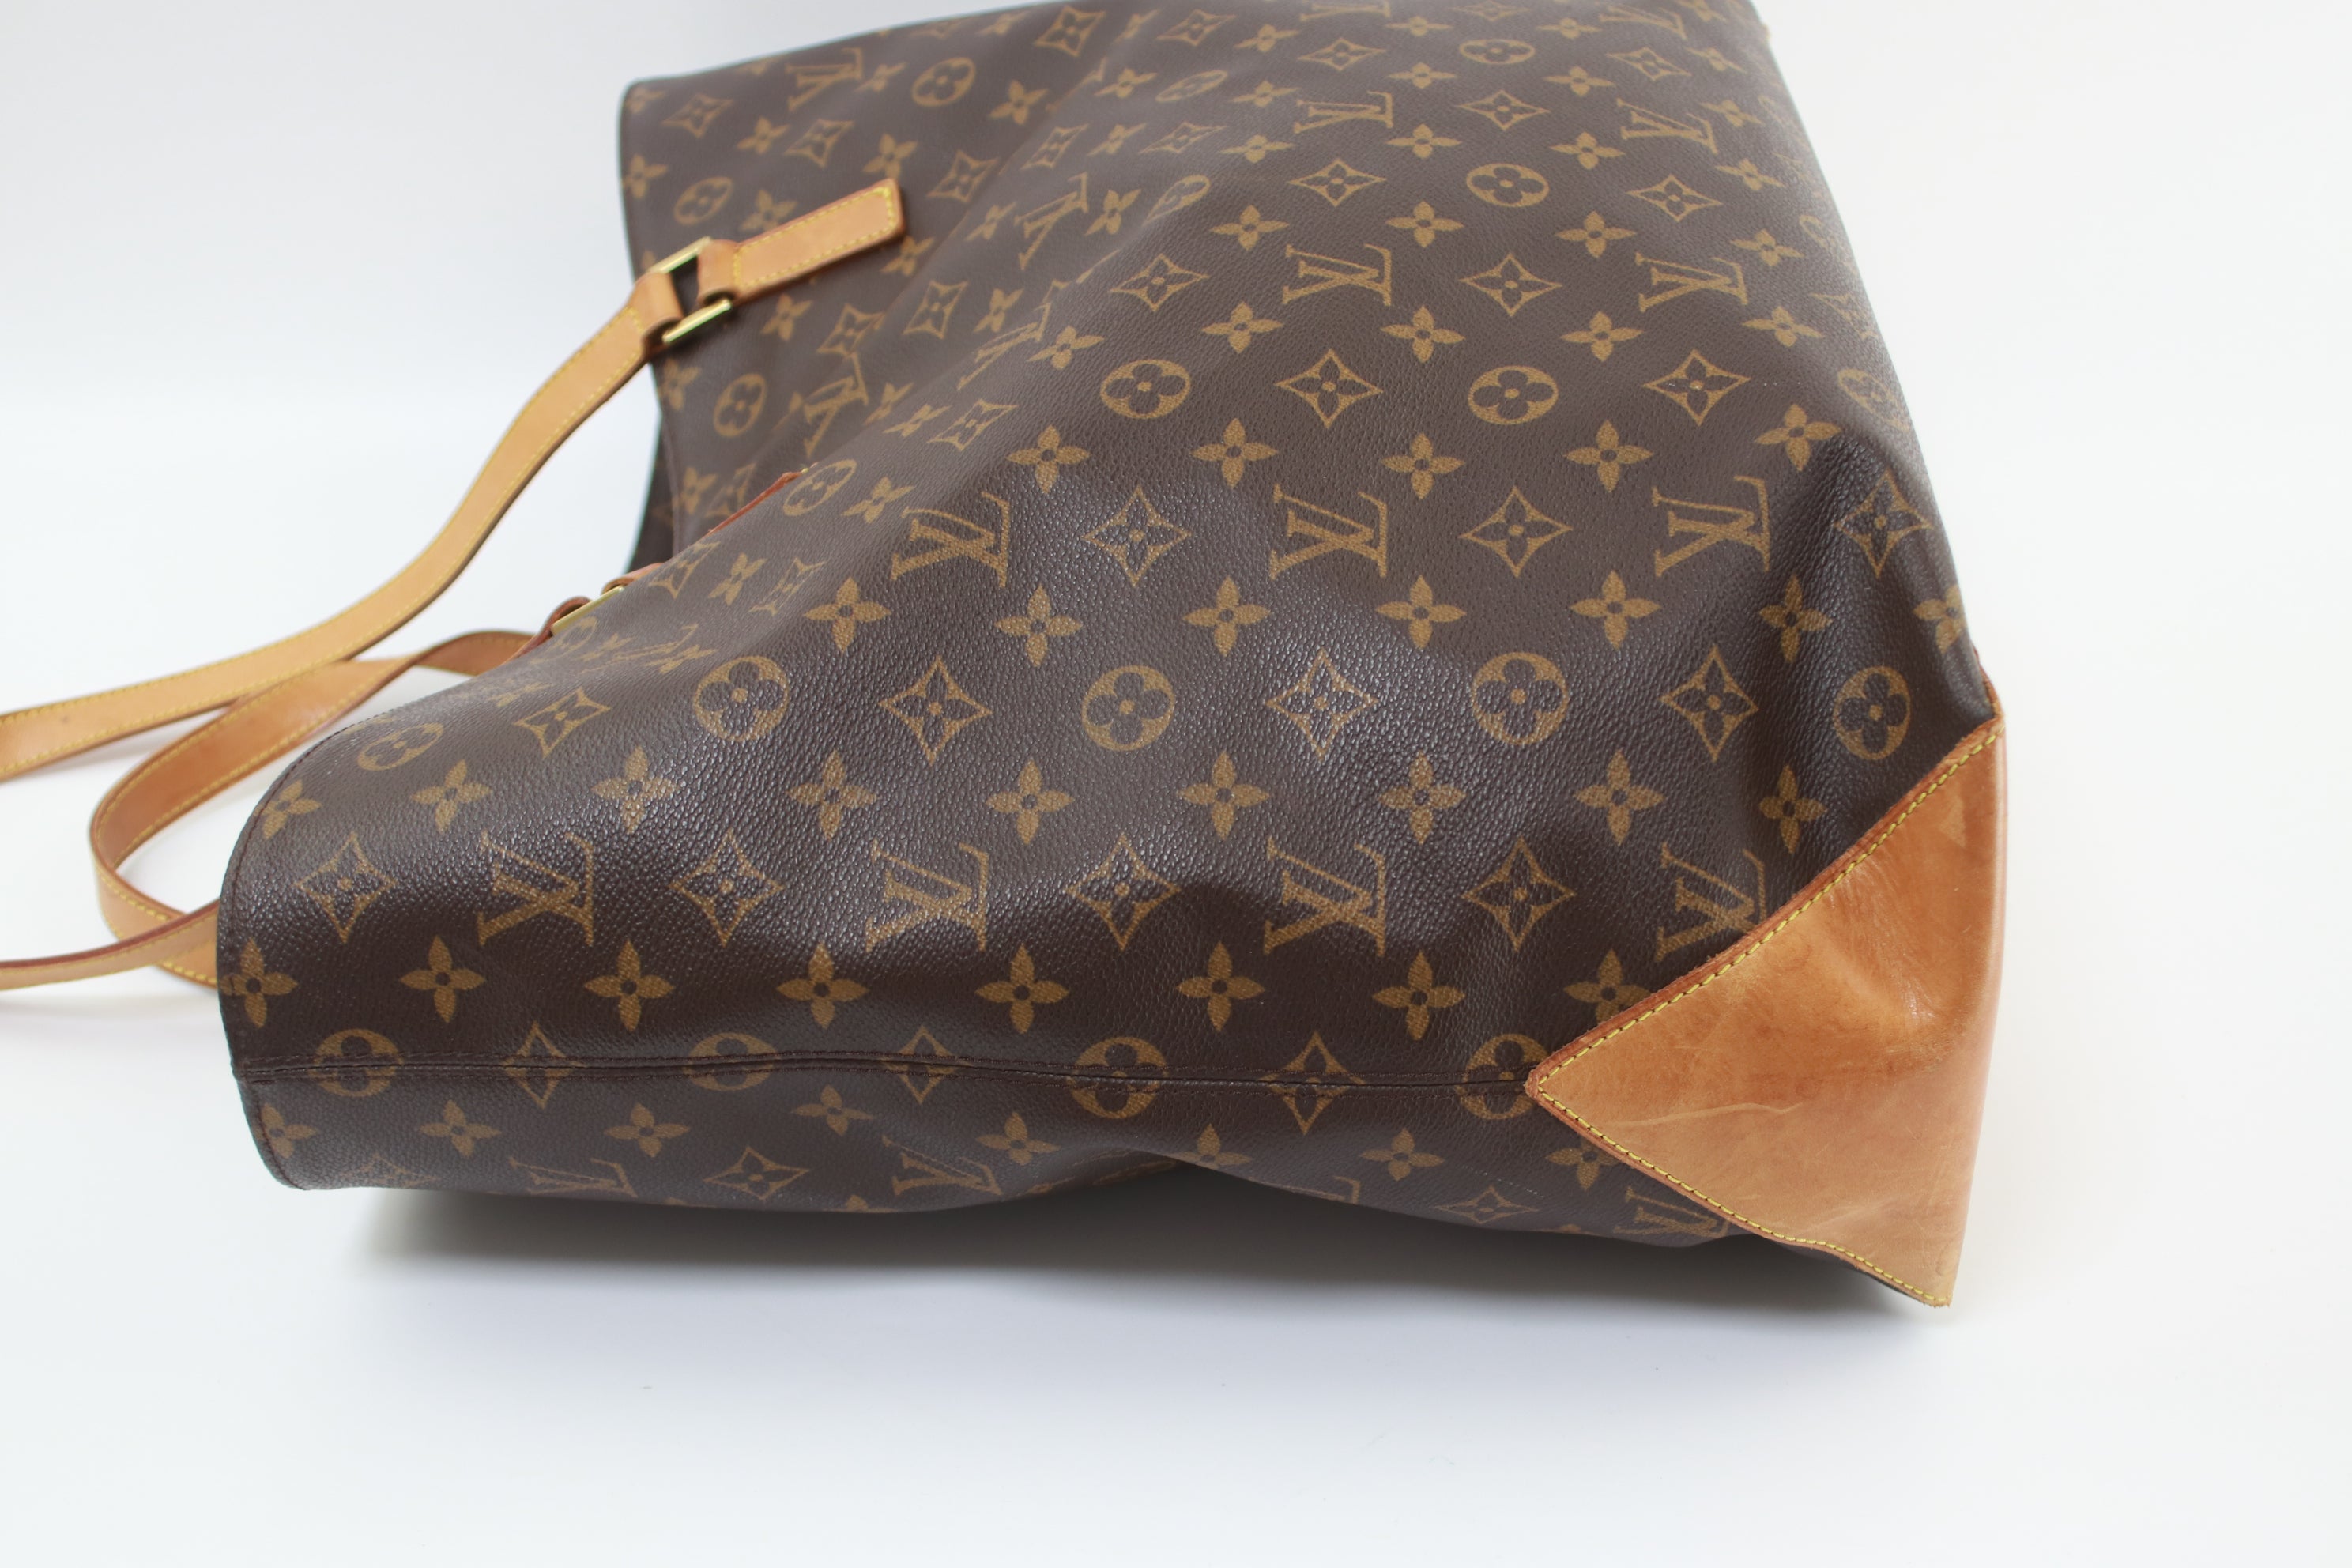 louis vuitton tote bag used